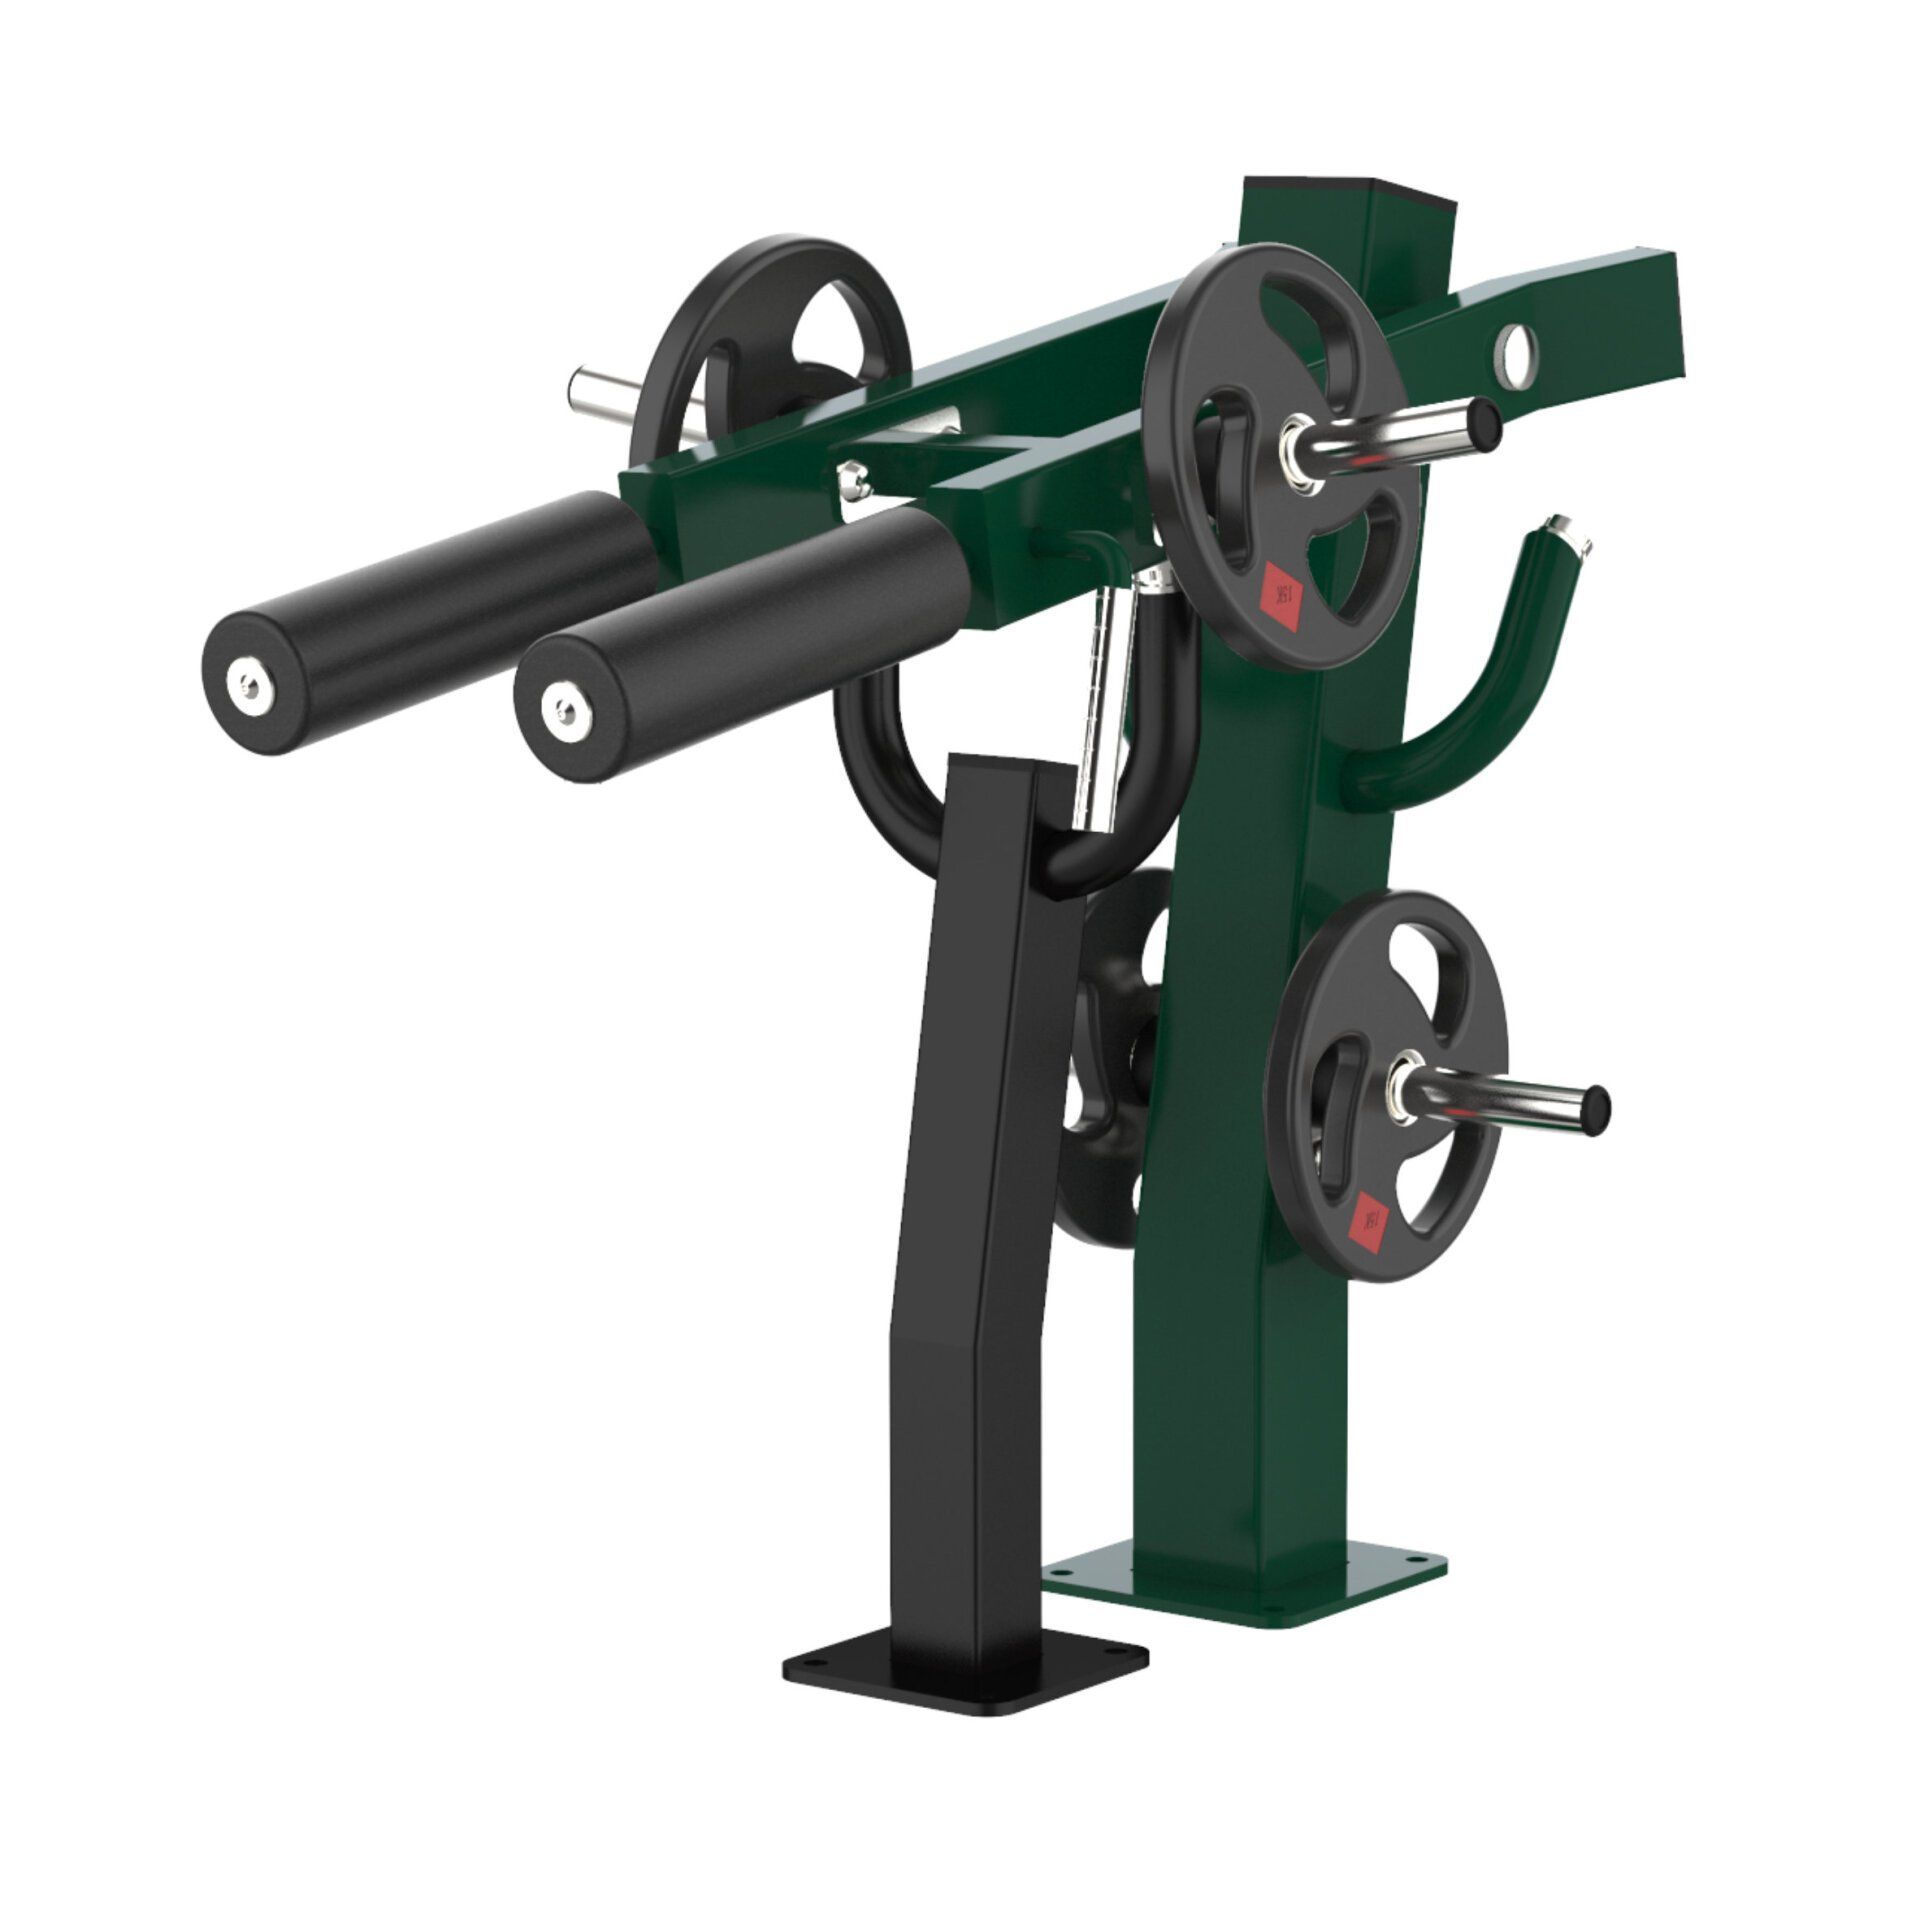 OPTEXI-001 OptiFit Excite Outdoor Plate Loaded Squat